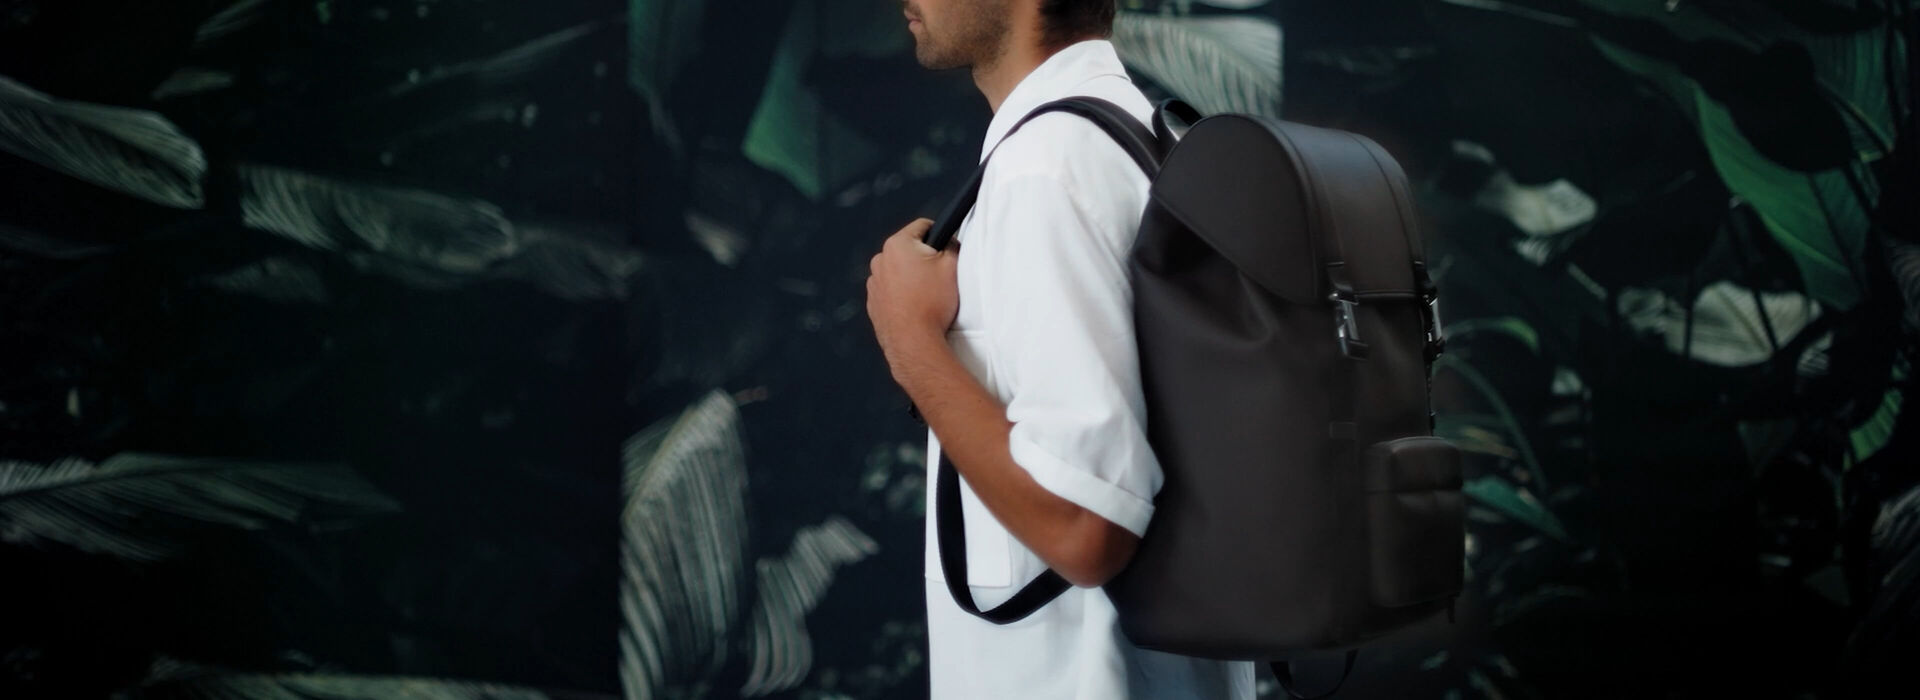 EXILE BACKPACKEXILE BACKPACK